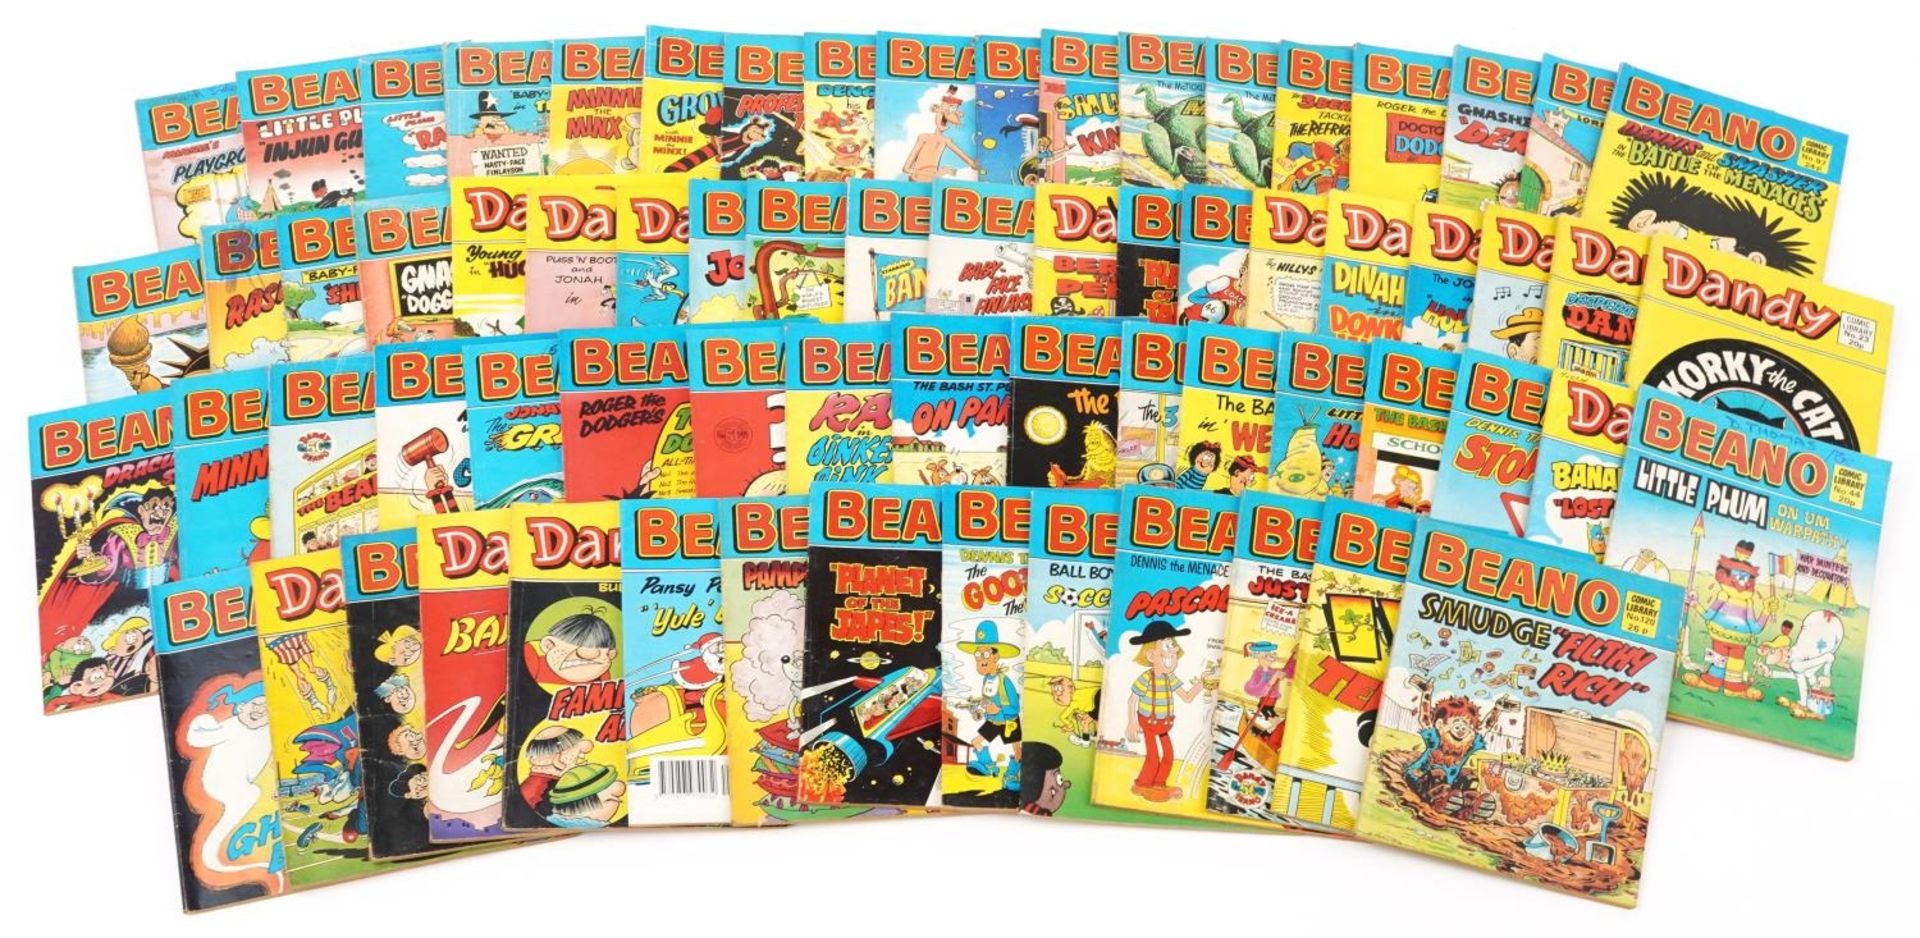 Collection of vintage Beano and Dandy comics, various issues : For further information on this lot